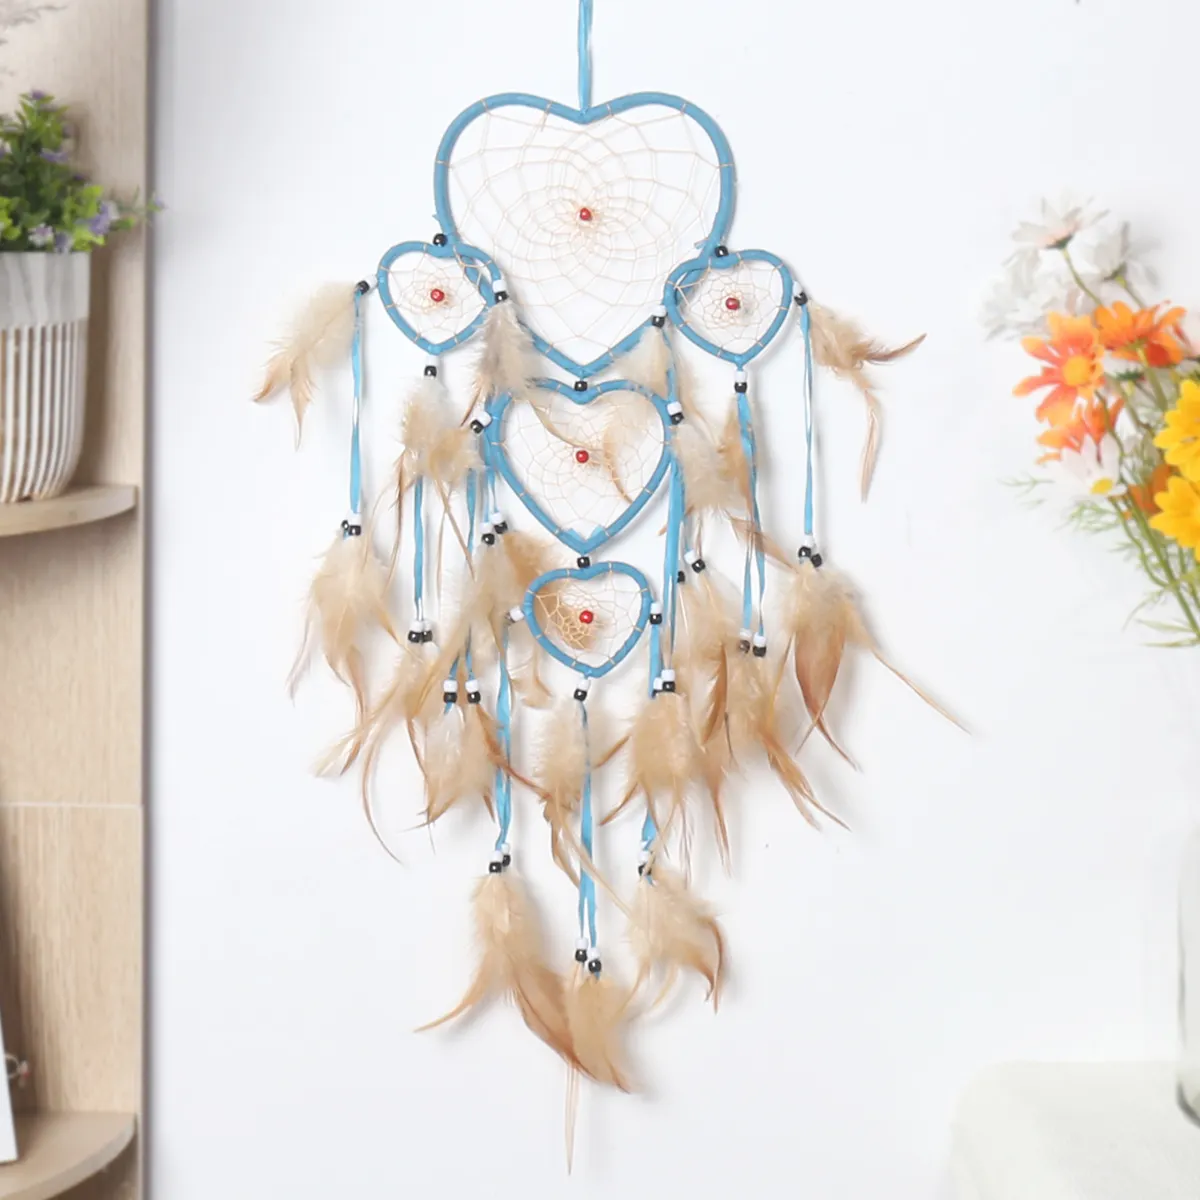 Dream Catcher WitColorful Feather Handmade 5 Hearted Iron Ring Dream Catcher Wall Decor Home Decor Nursery Baby Kids Bedroom